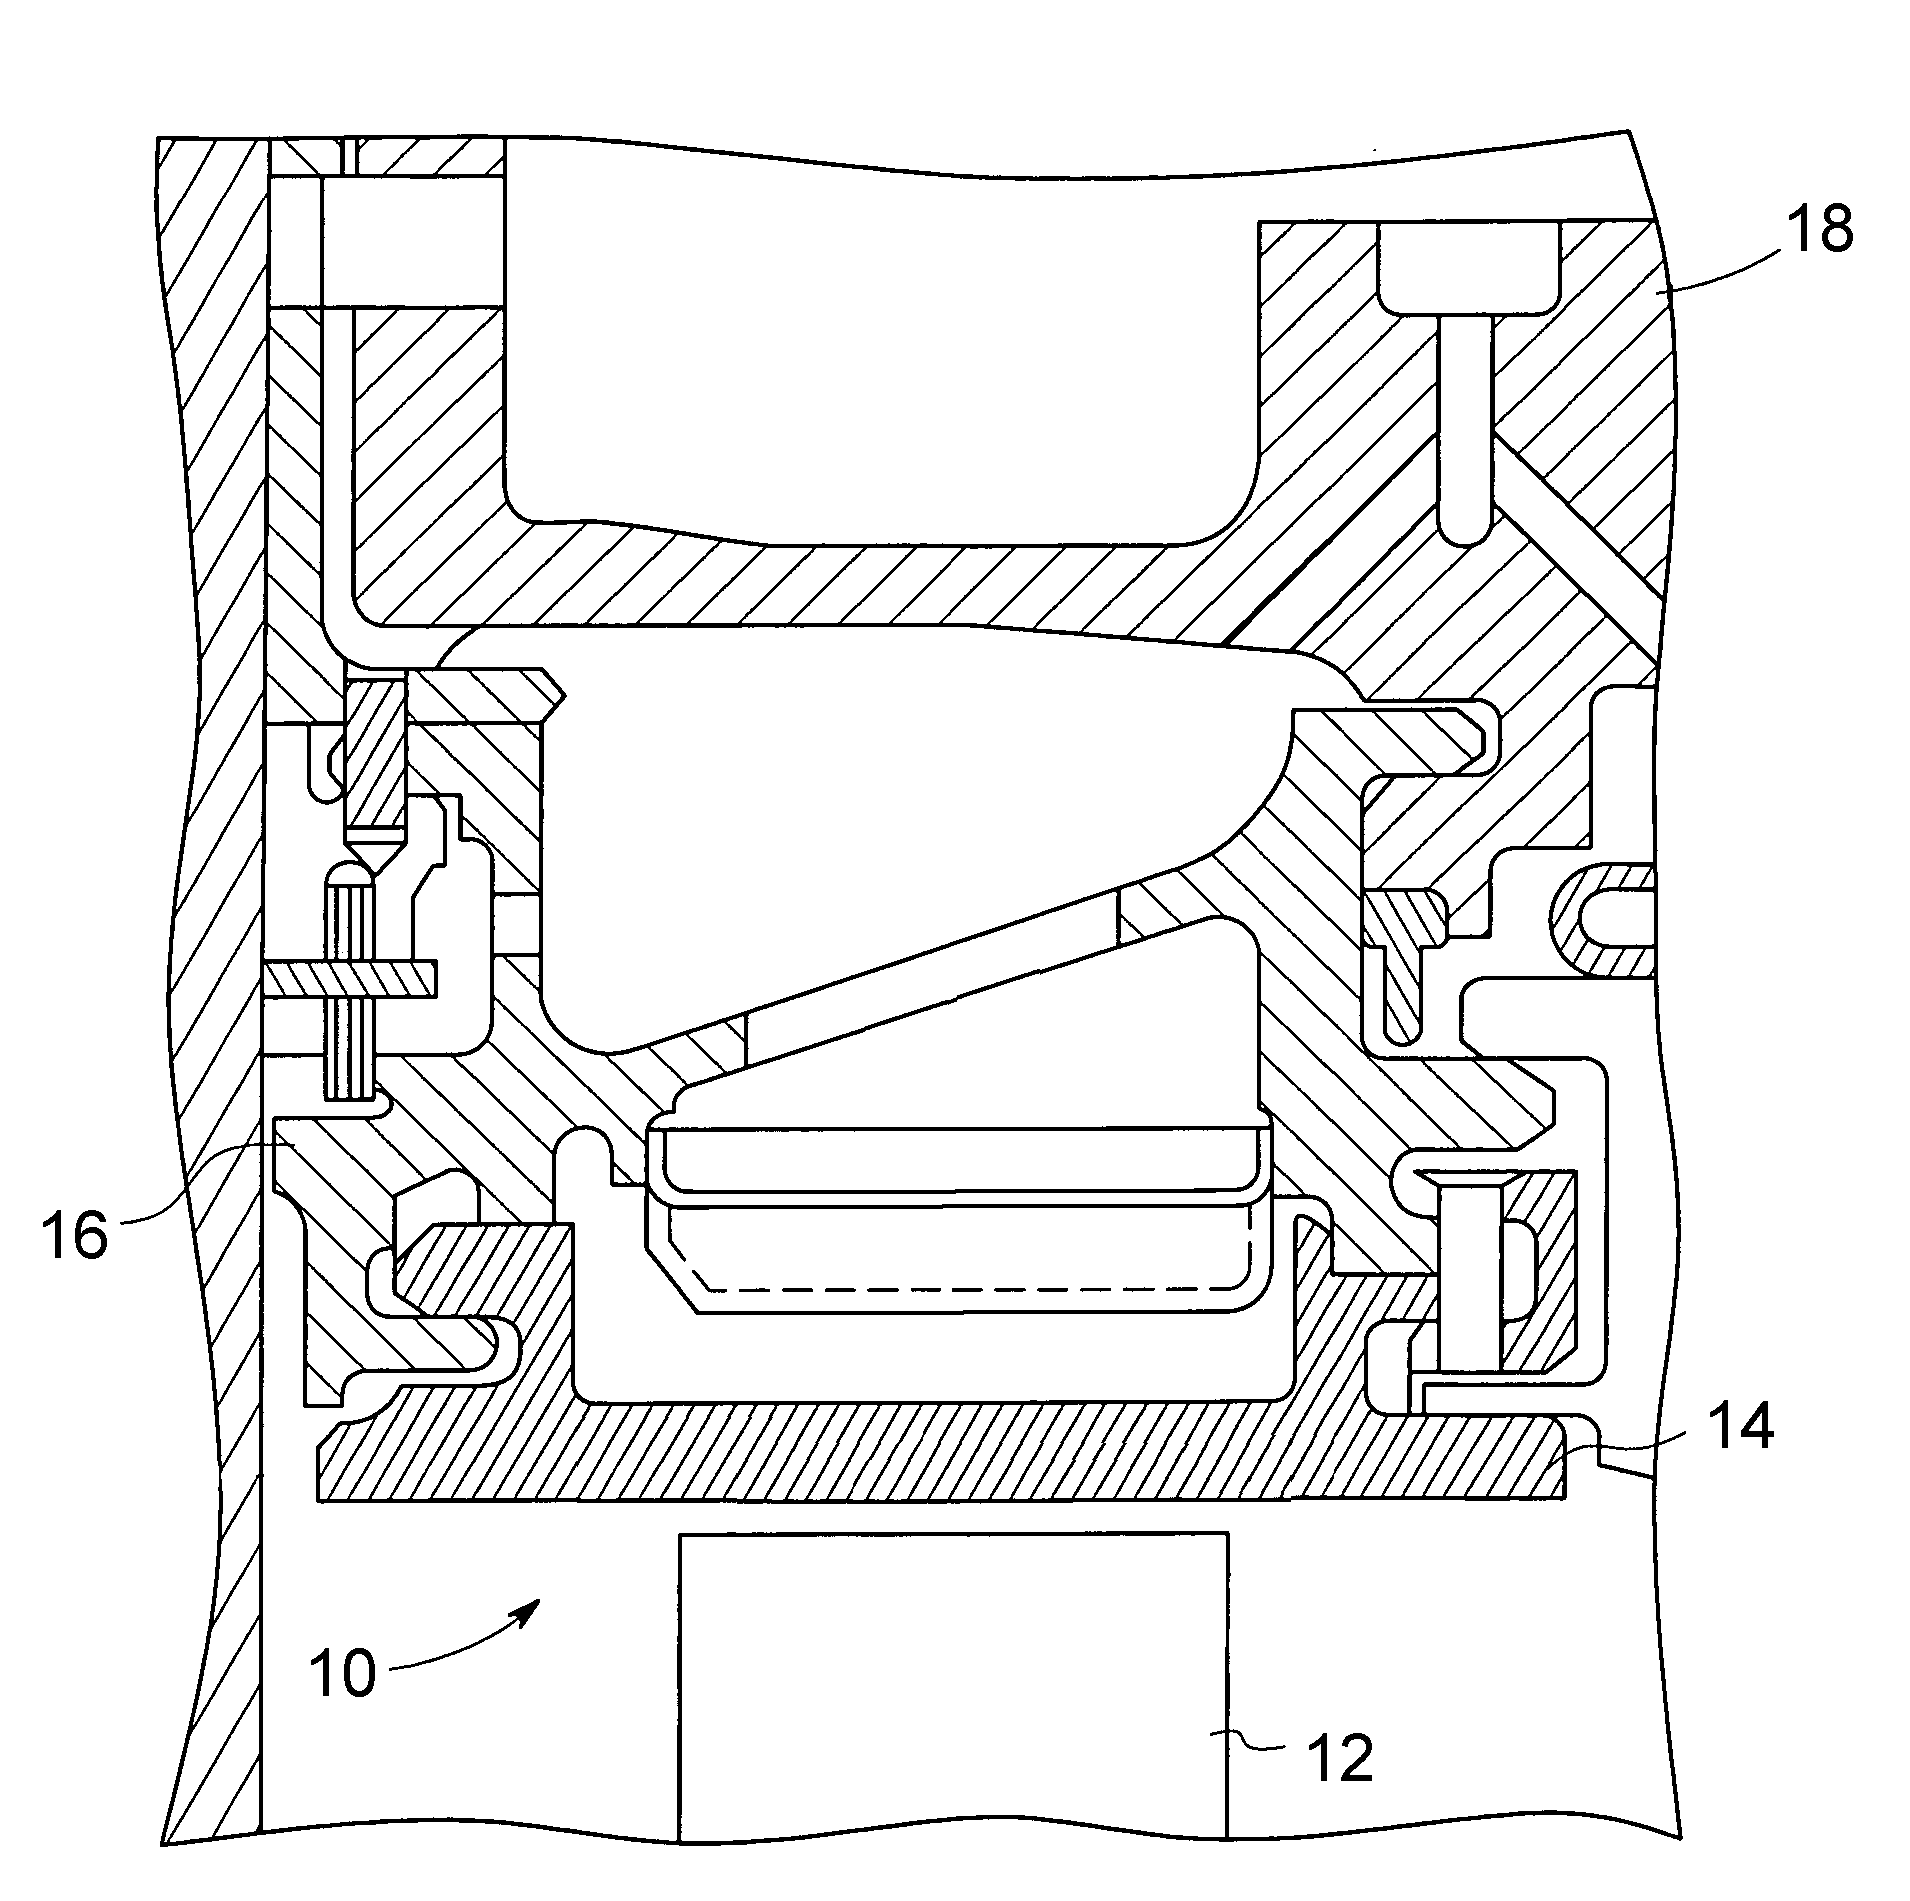 Forged austenitic stainless steel alloy components and method therefor